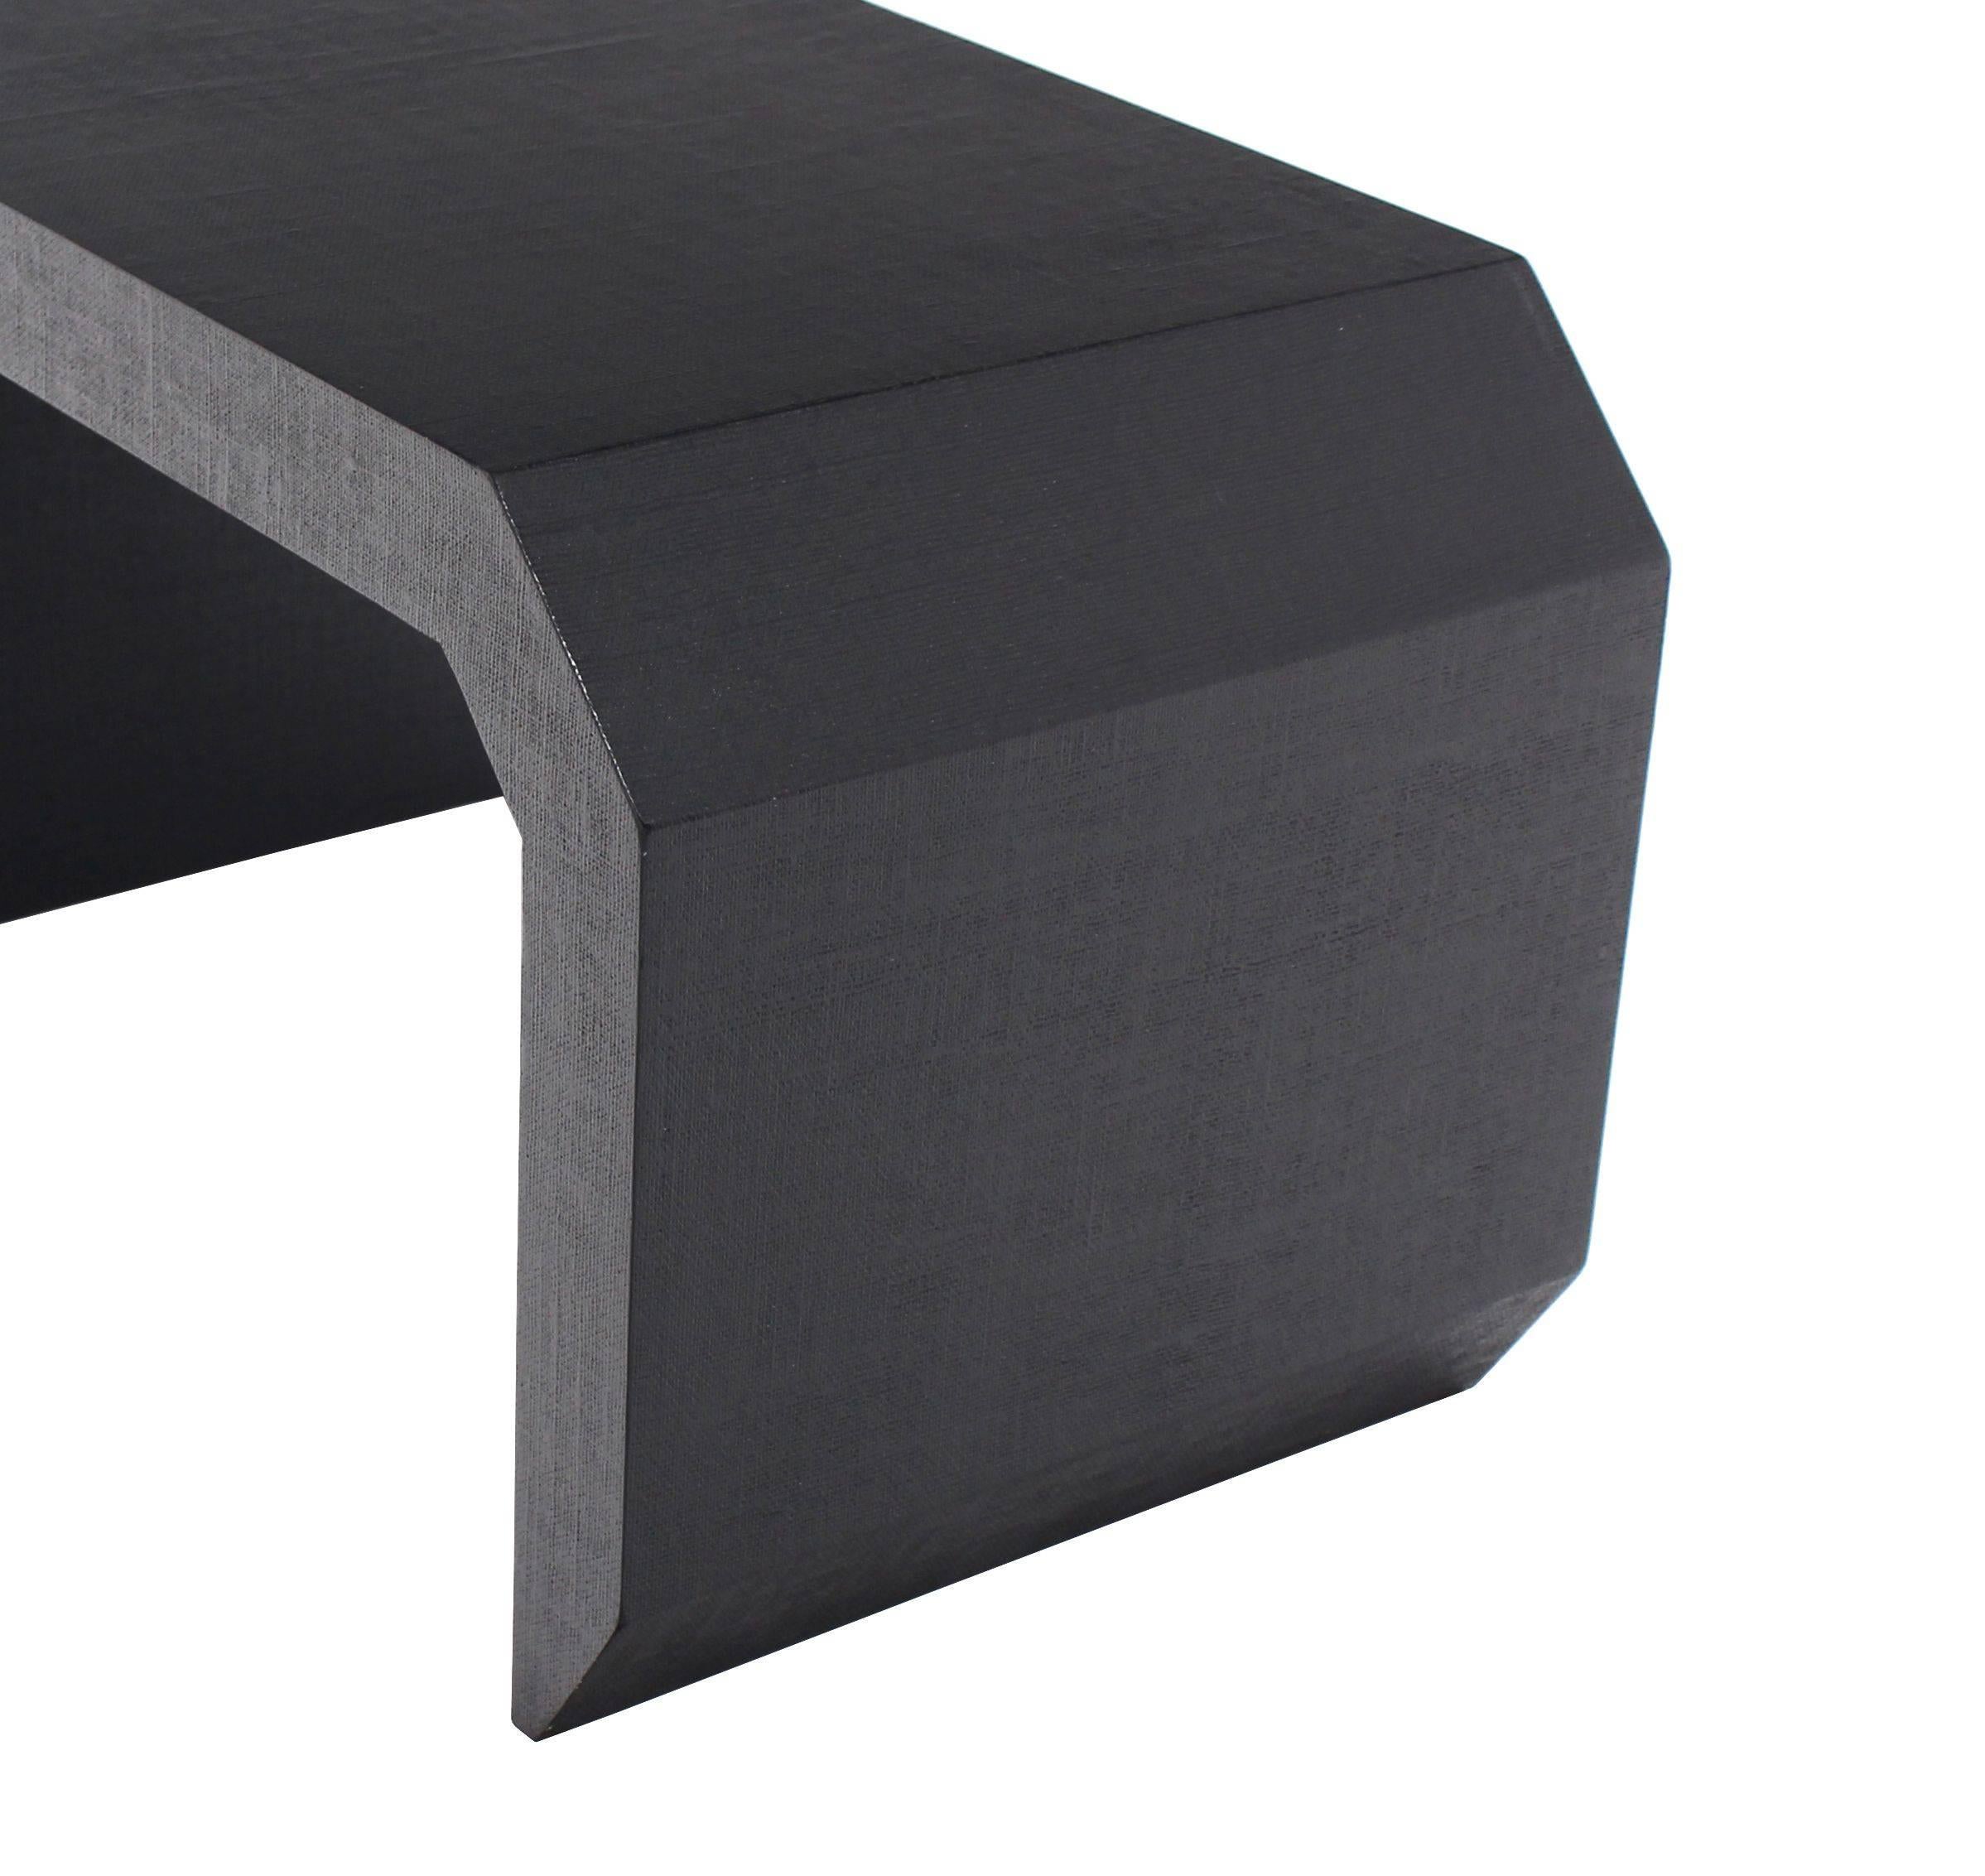 American Grass Cloth C Shape Coffee Table For Sale